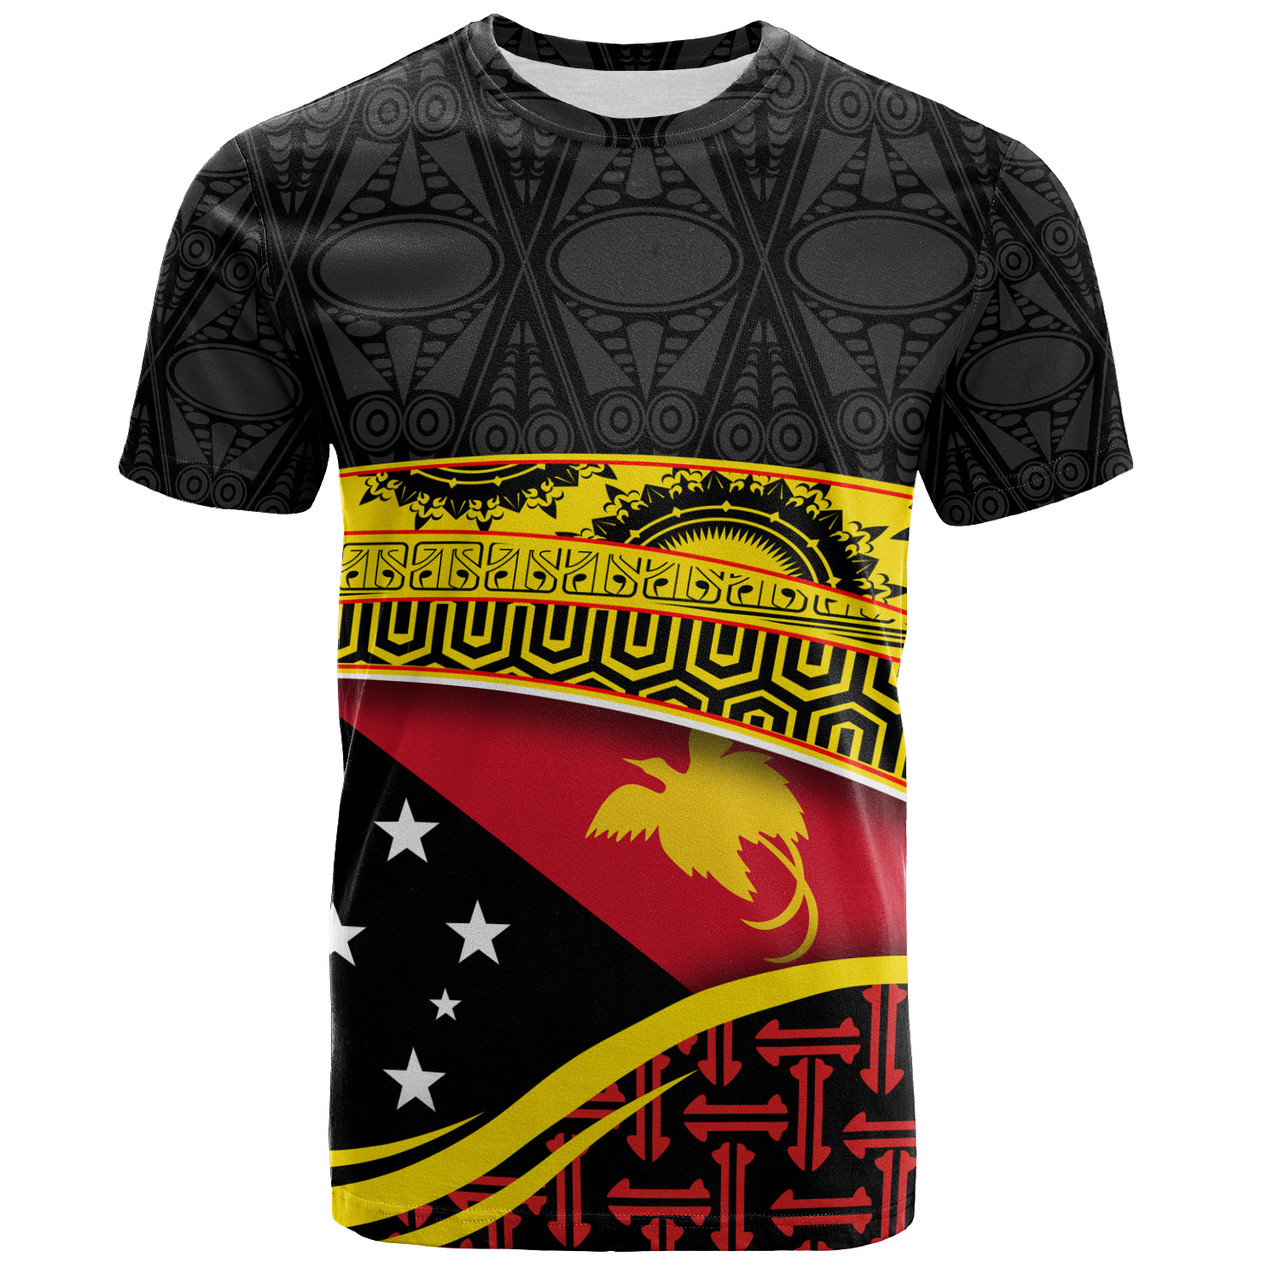 Papua New Guinea Custom Personalized T-Shirt With Tribal Motif